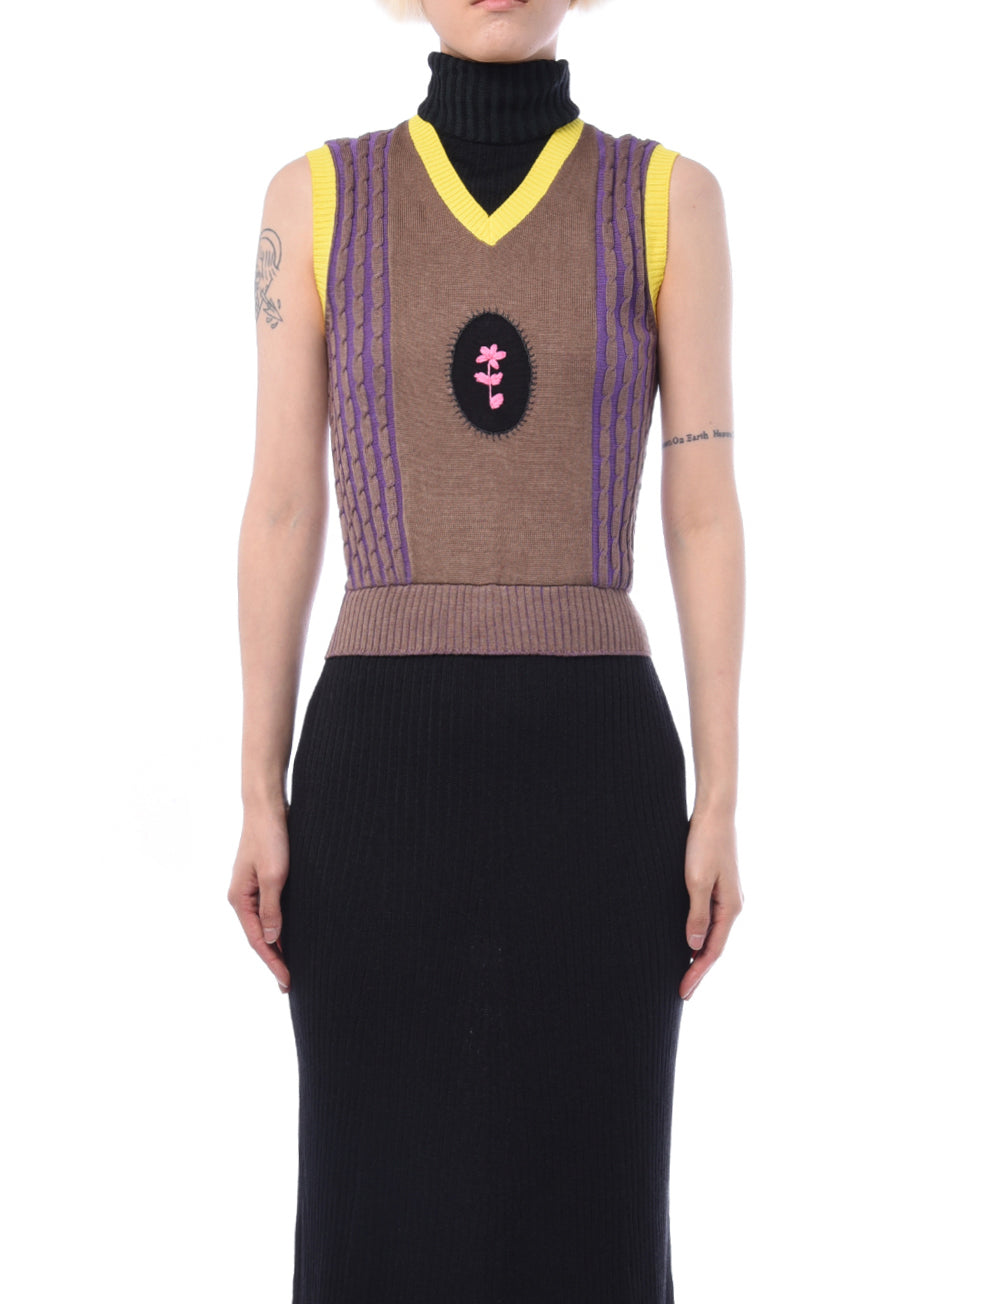 Cormio Wang Embroidered Vest Dress